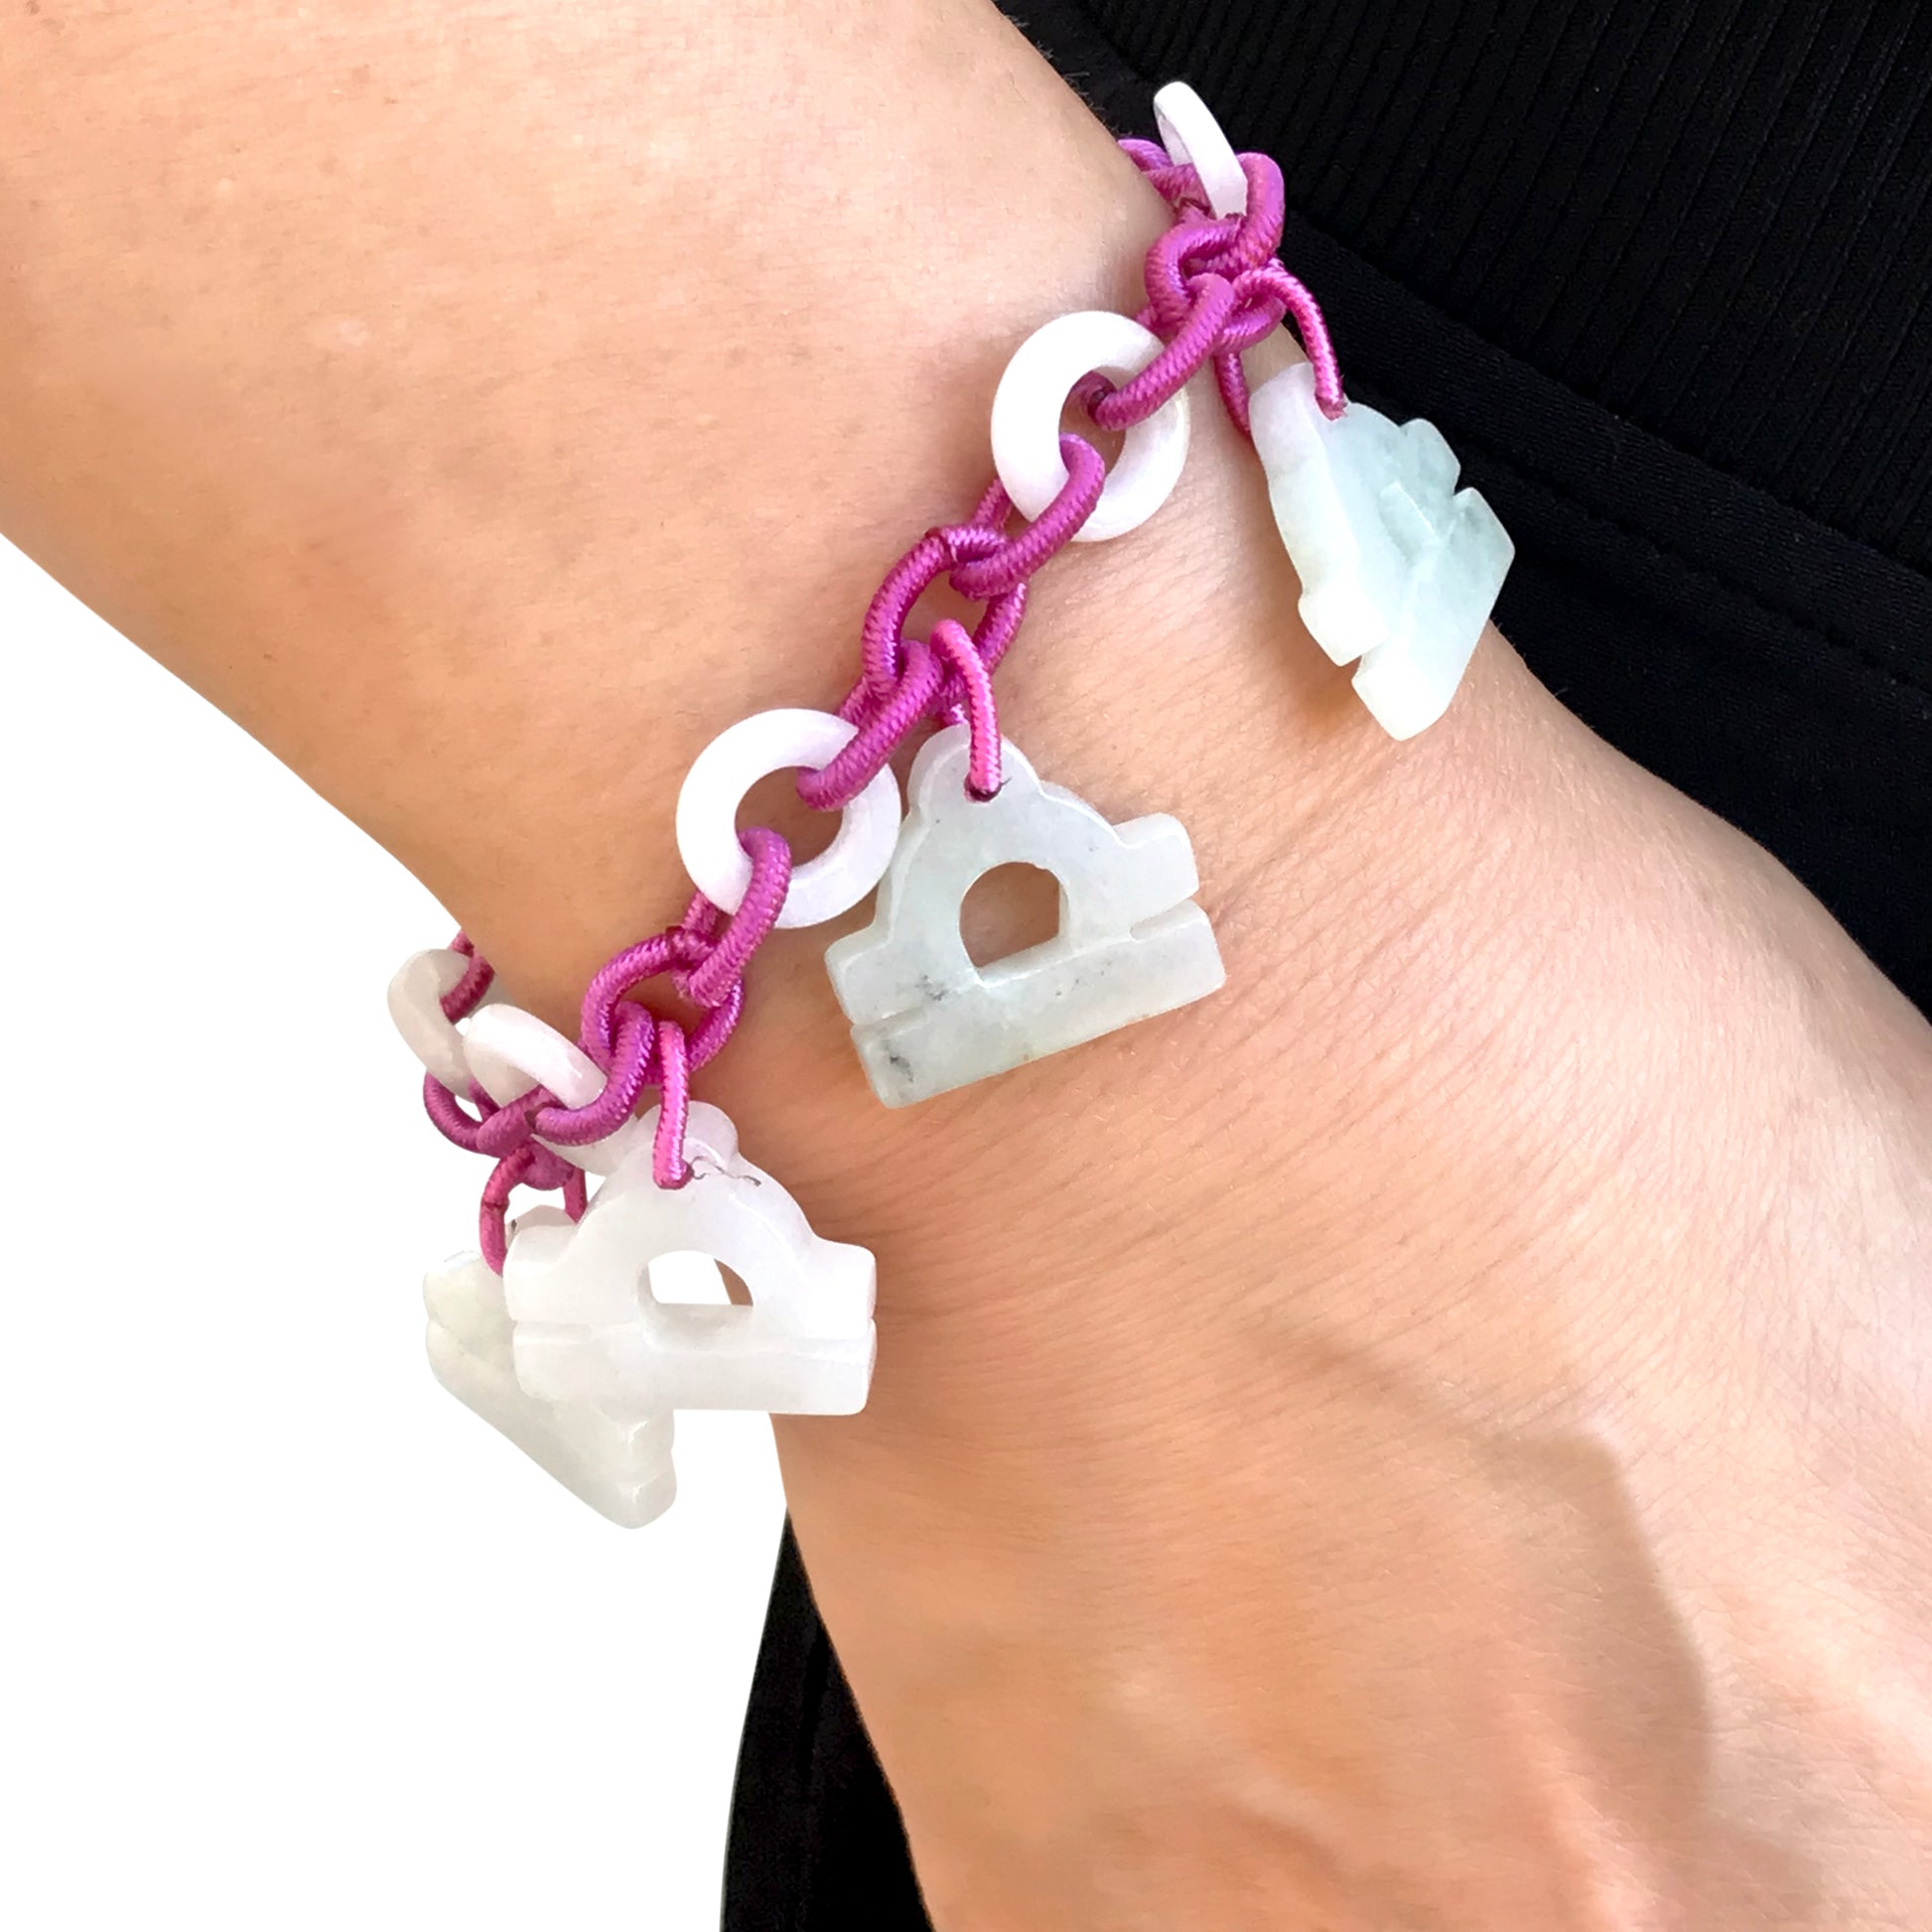 Symbolize your Libra Pride with a Handmade Jade Bracelet made with Purple Cord